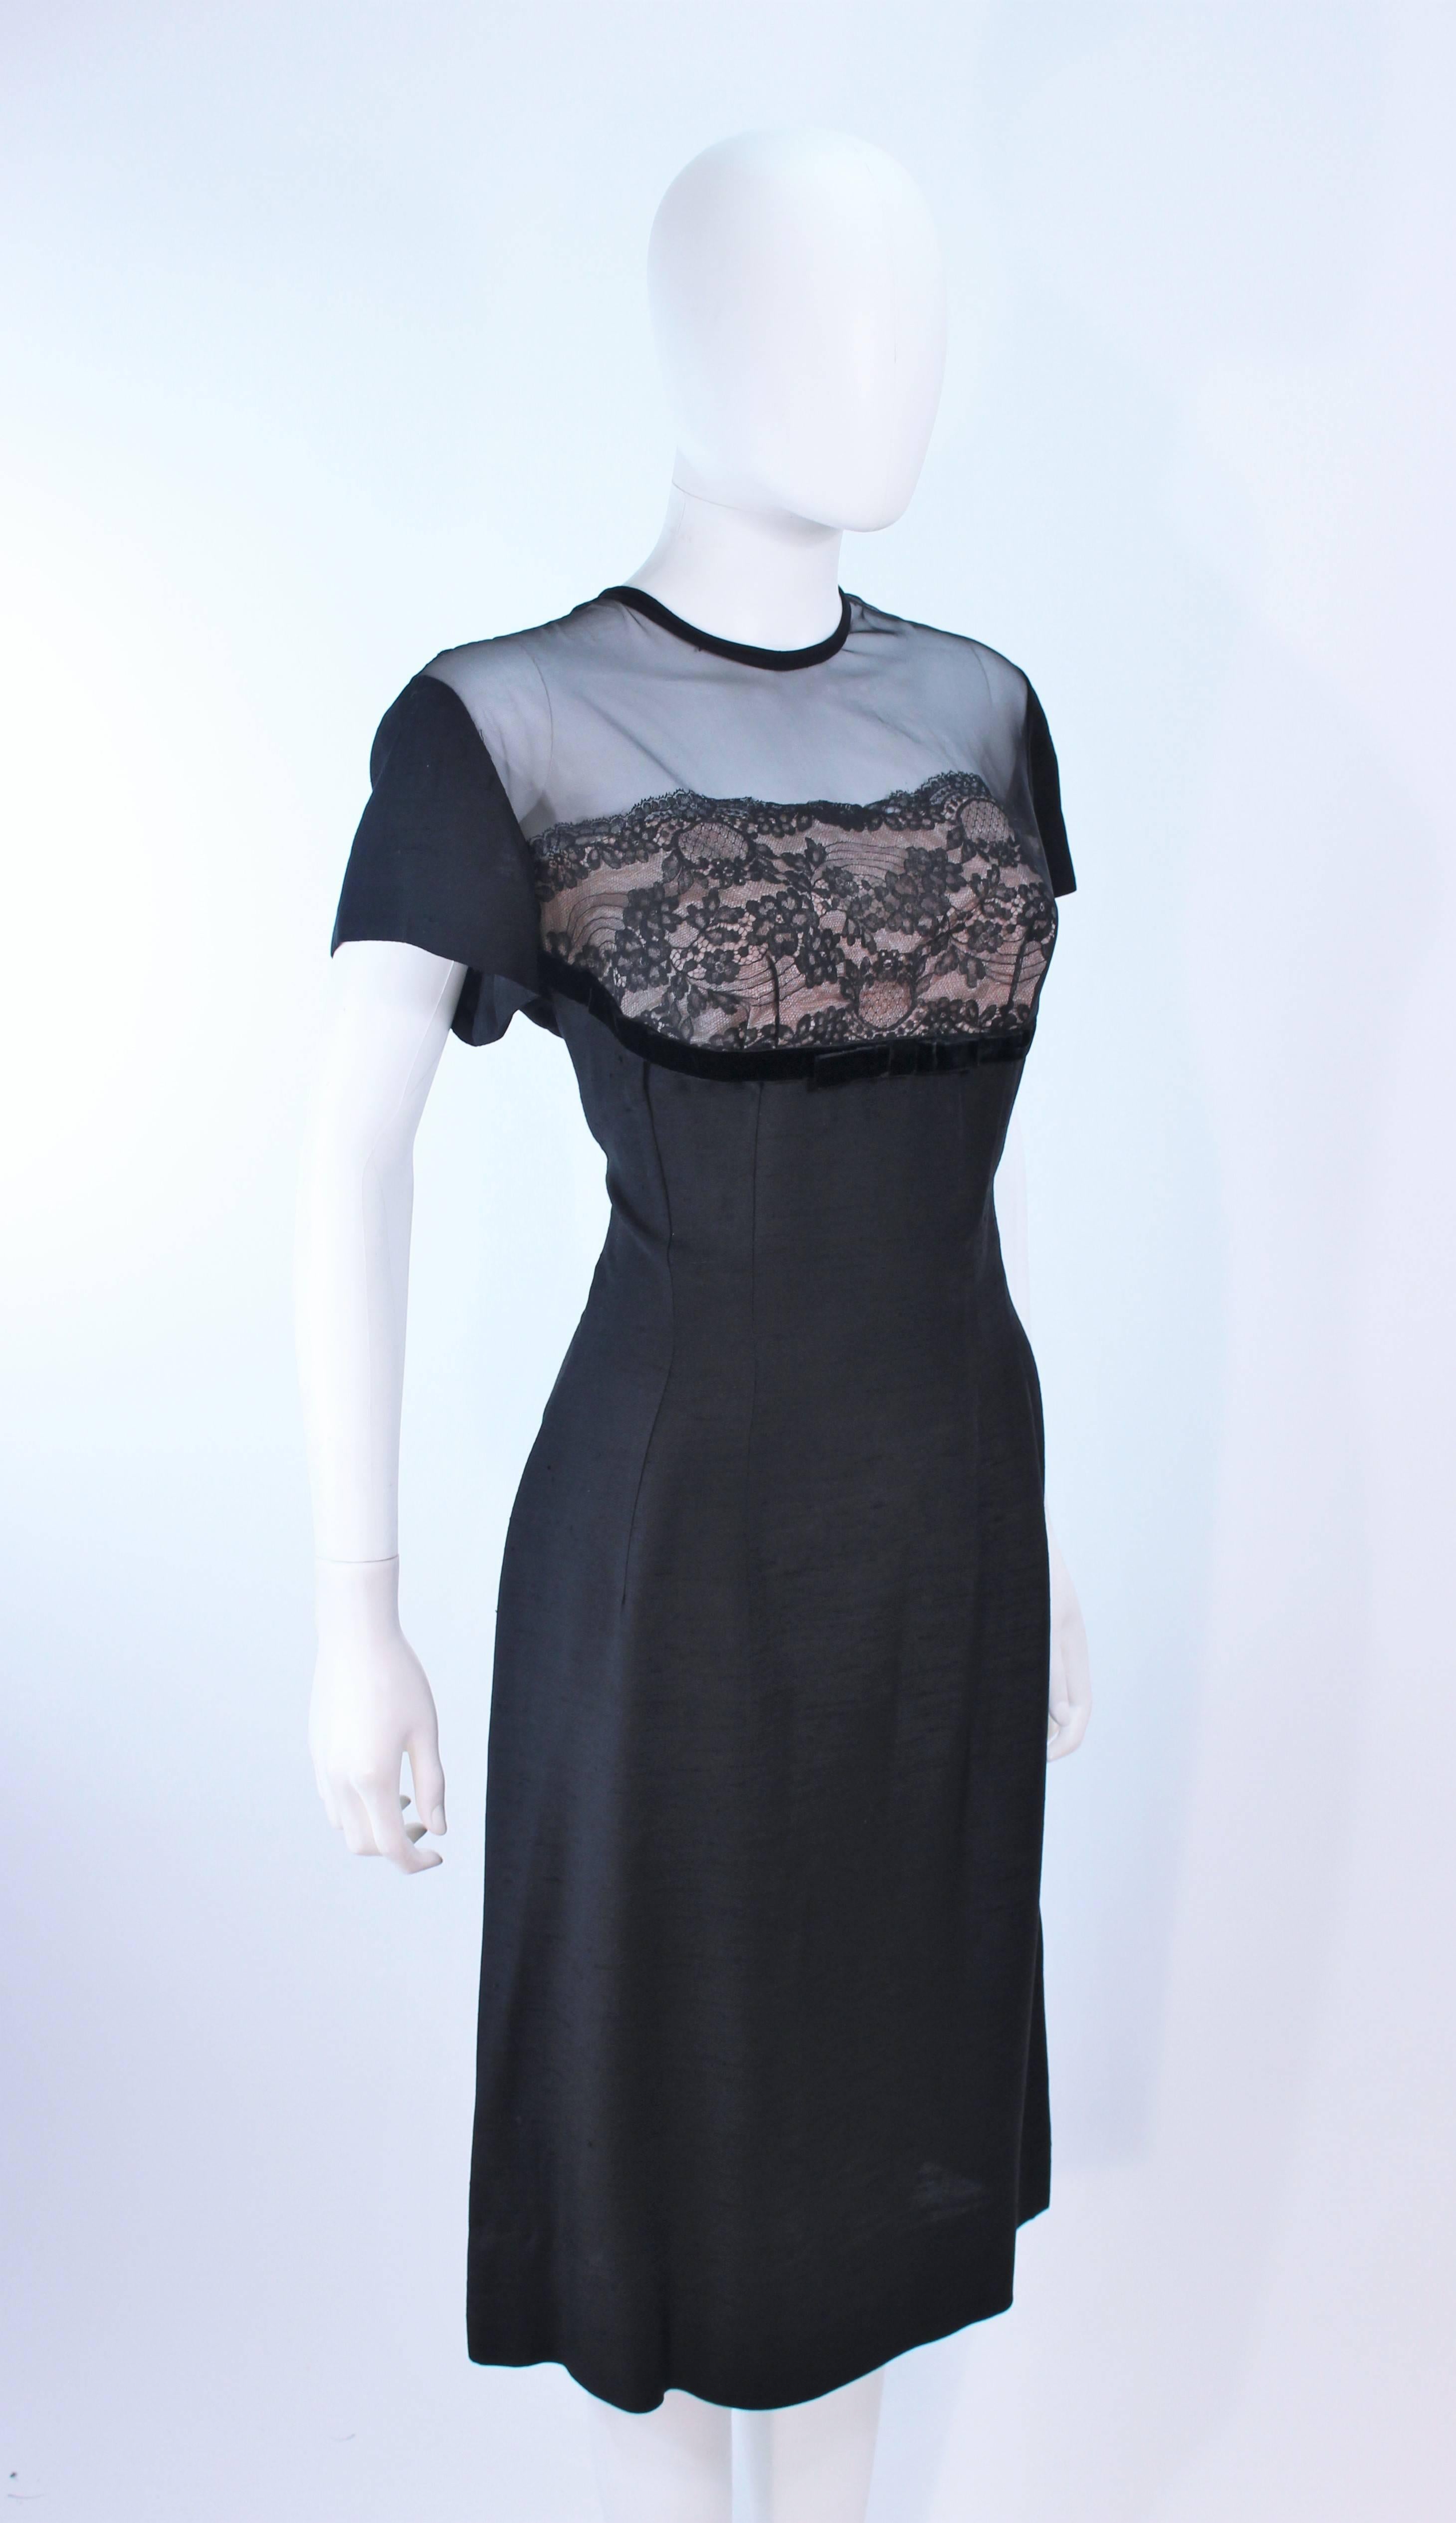 J. HARLAN Black Silk and Lace Cocktail Dress with Sheer Details Size 8 For Sale 2